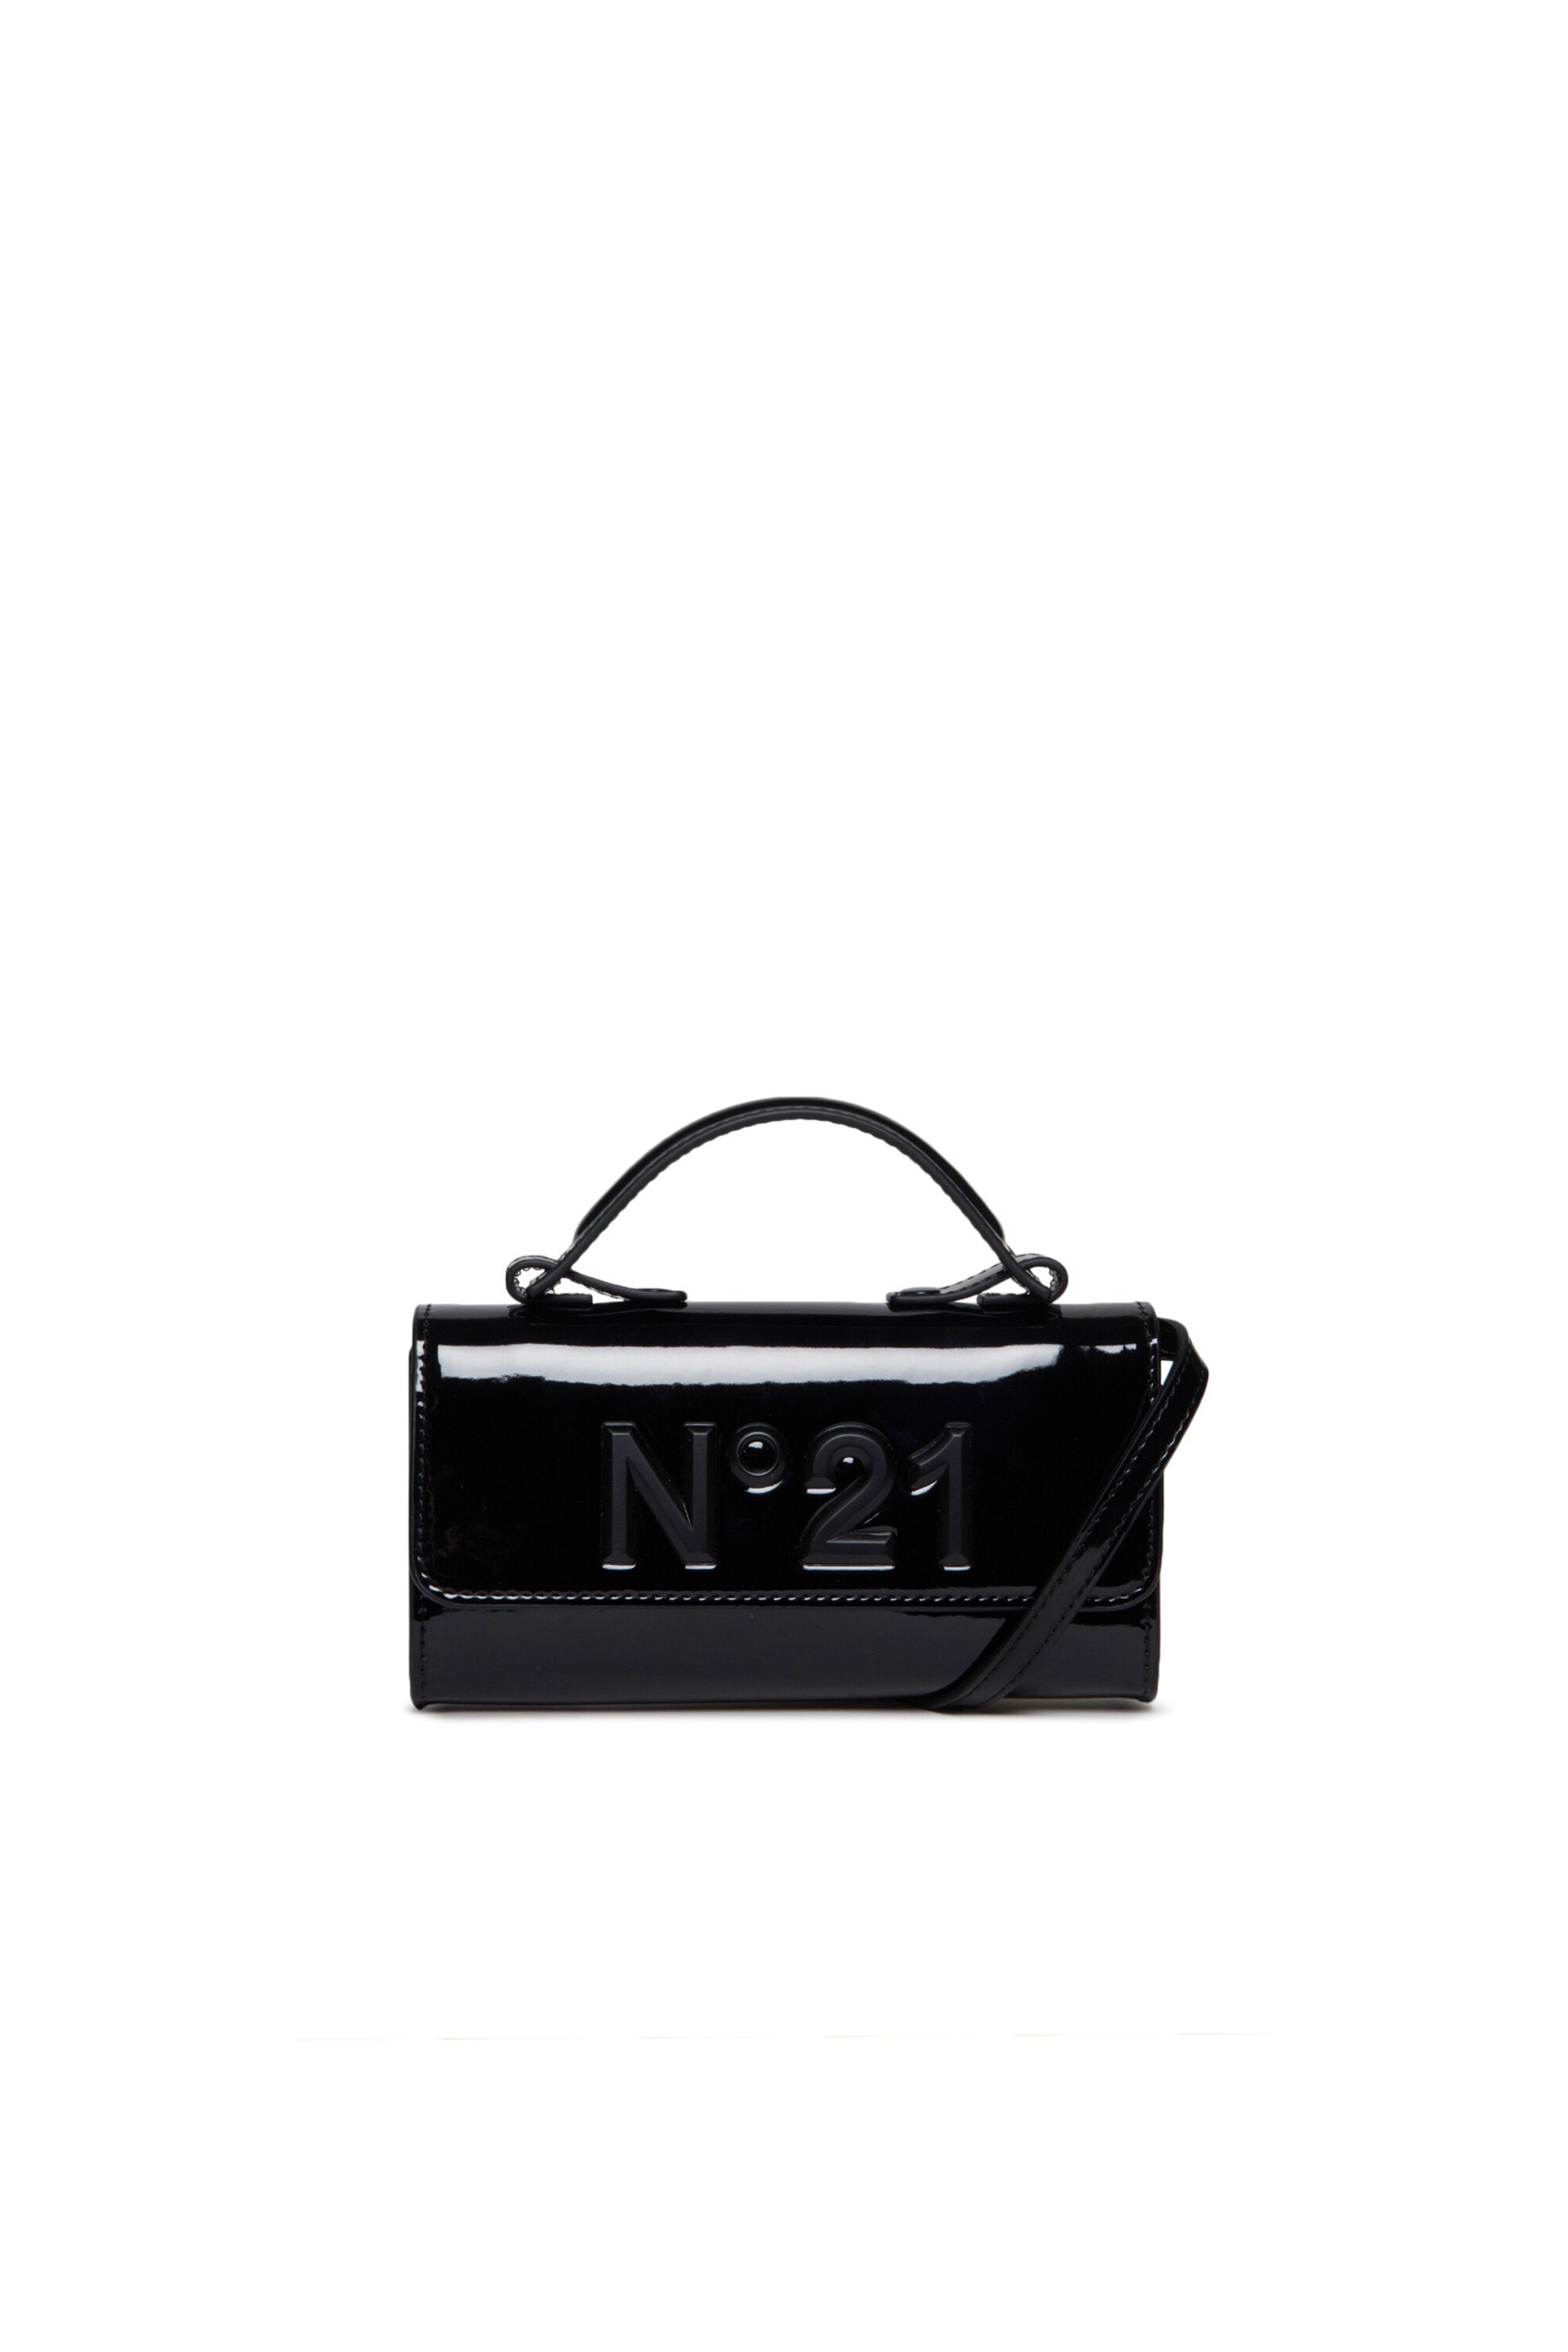 Black mini bag in leatherette with varnished effect and handle